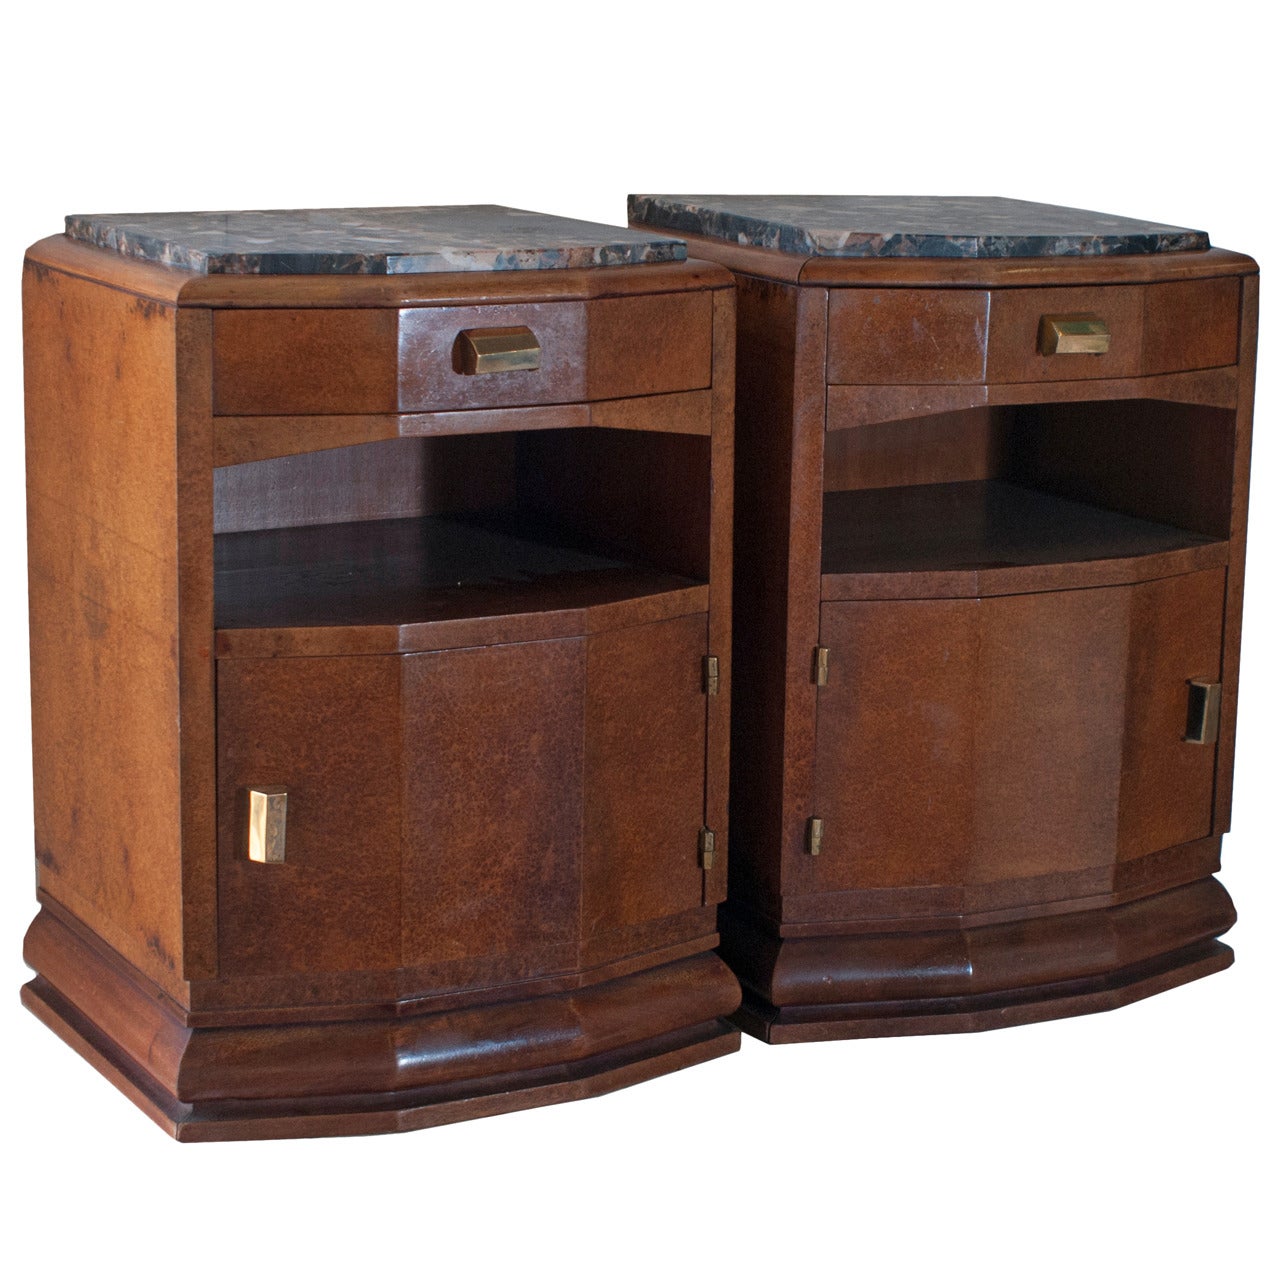 Pair of Chevets in Rare Loupe d'orme (Burr Elm) Wood with Marble Tops For Sale